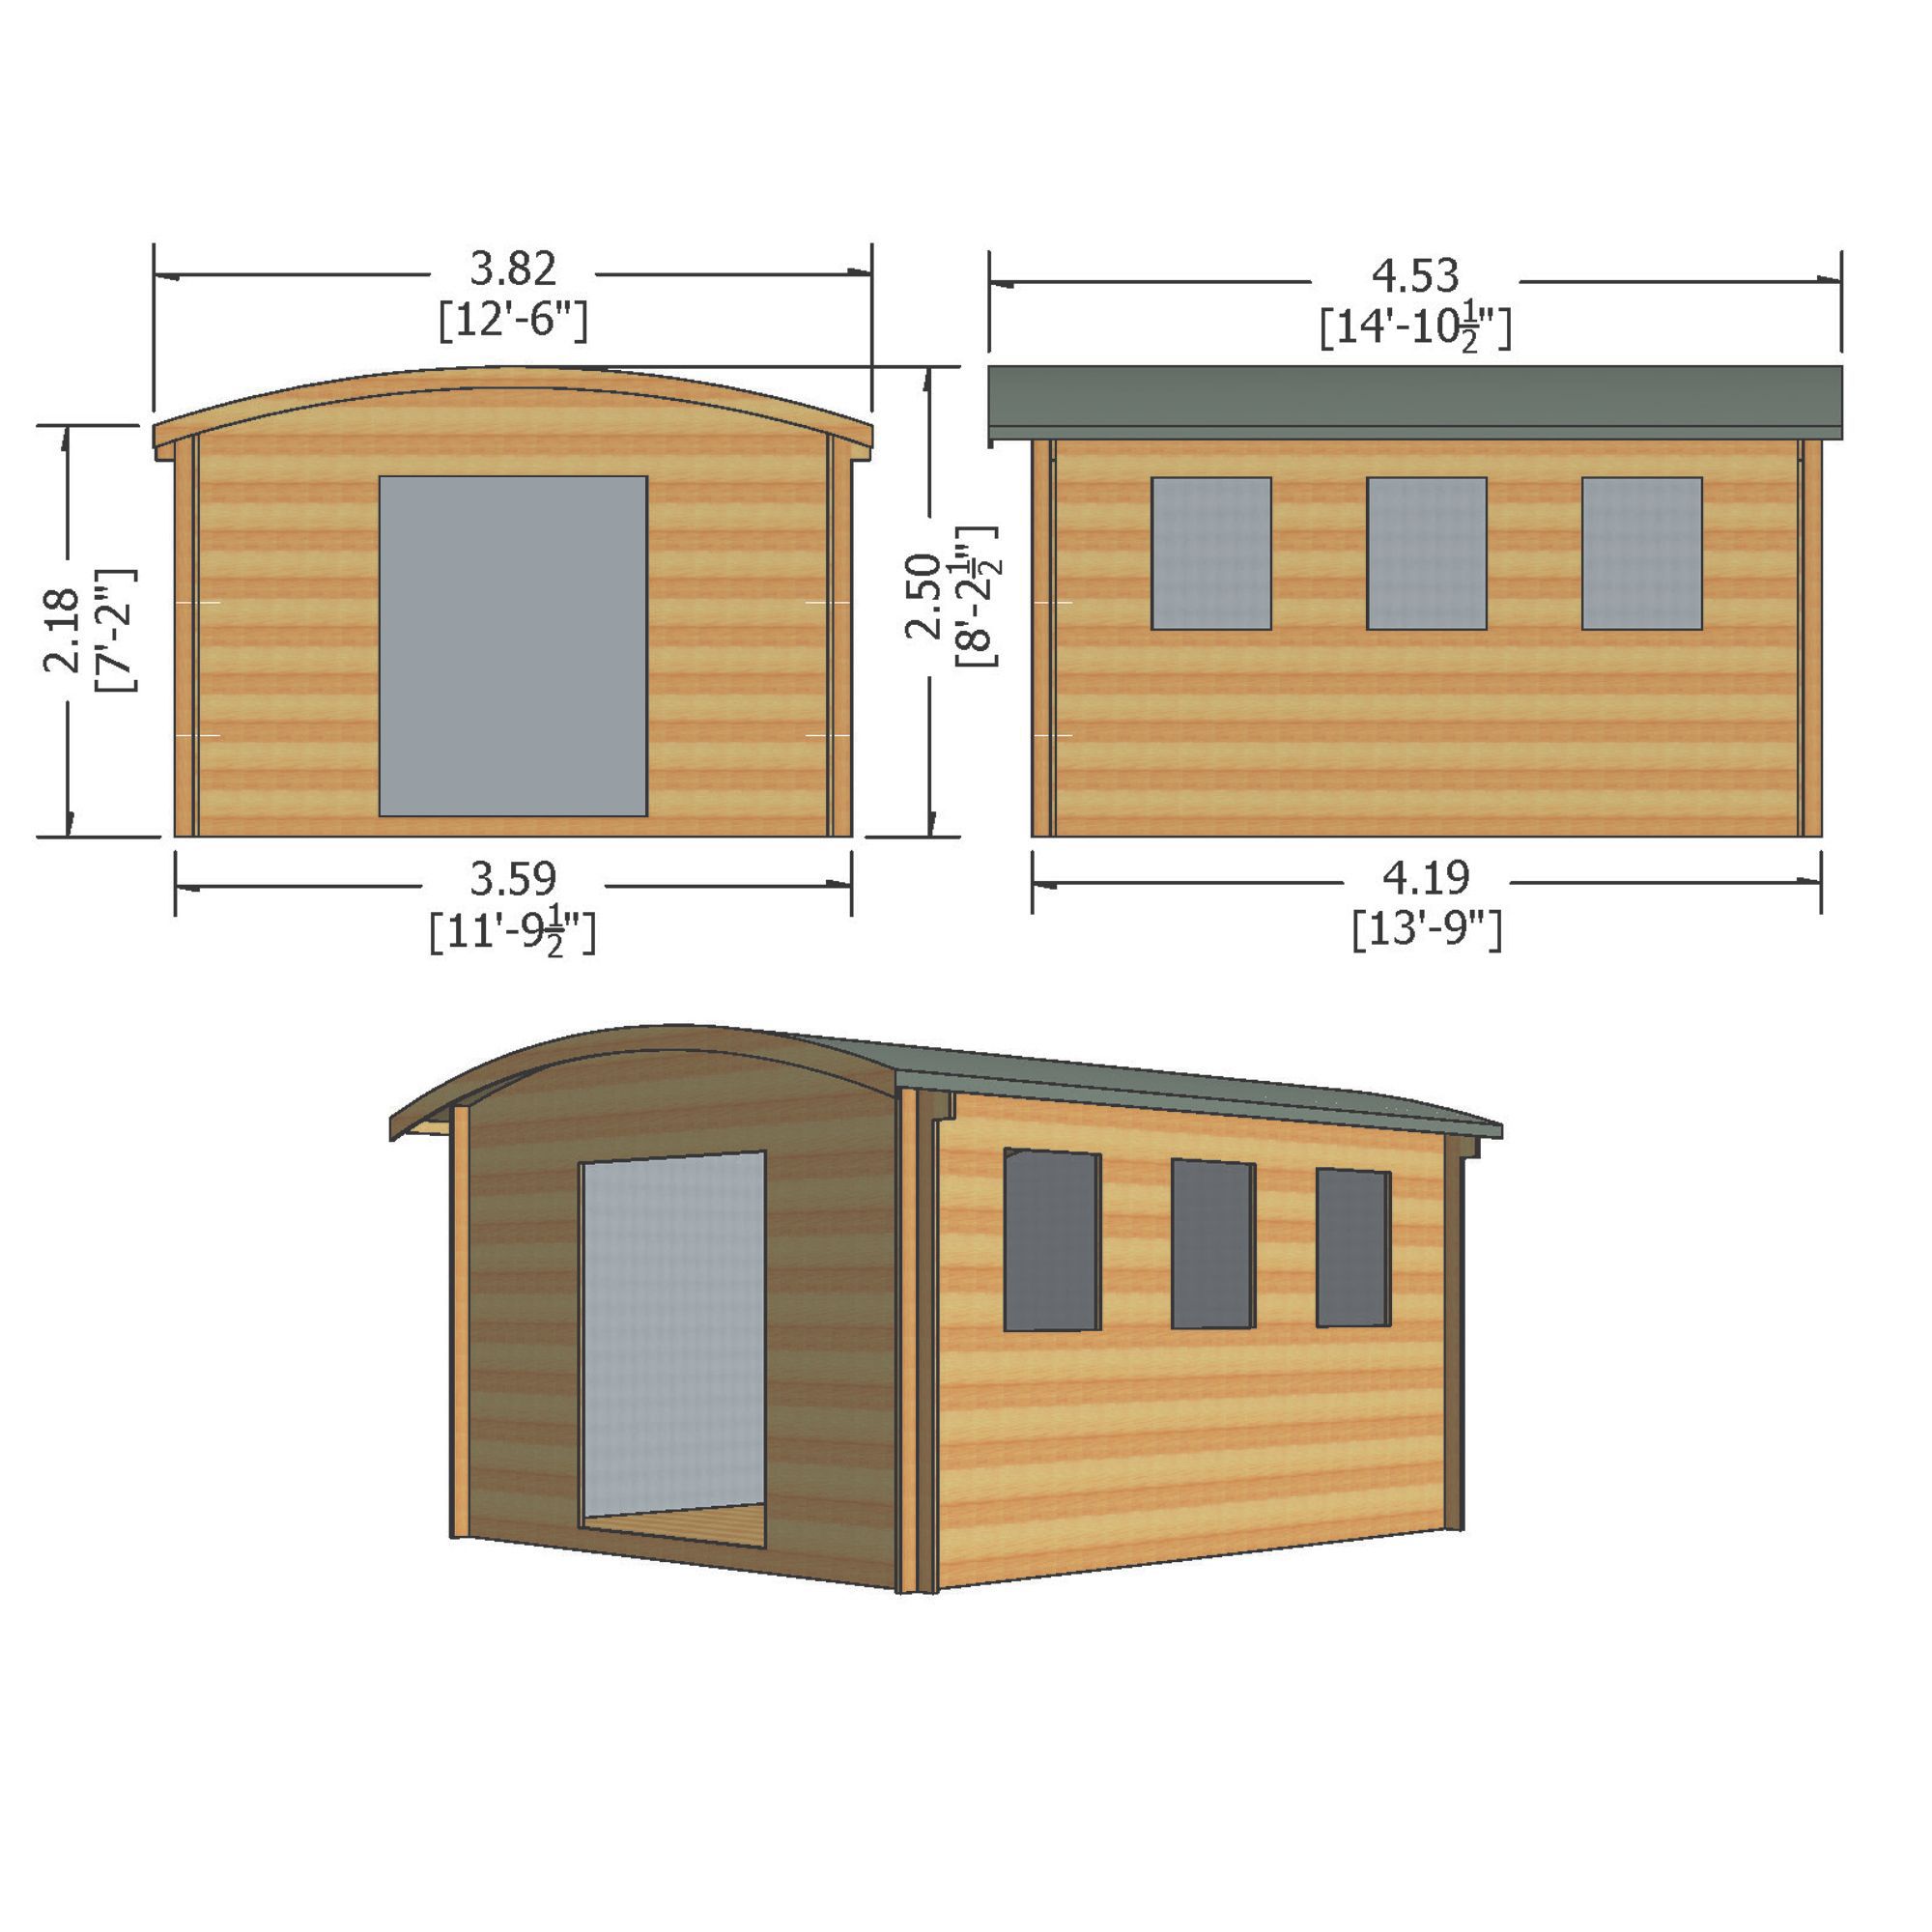 Shire Kilburn 12x14 ft Toughened glass & 3 windows Curved Wooden Cabin